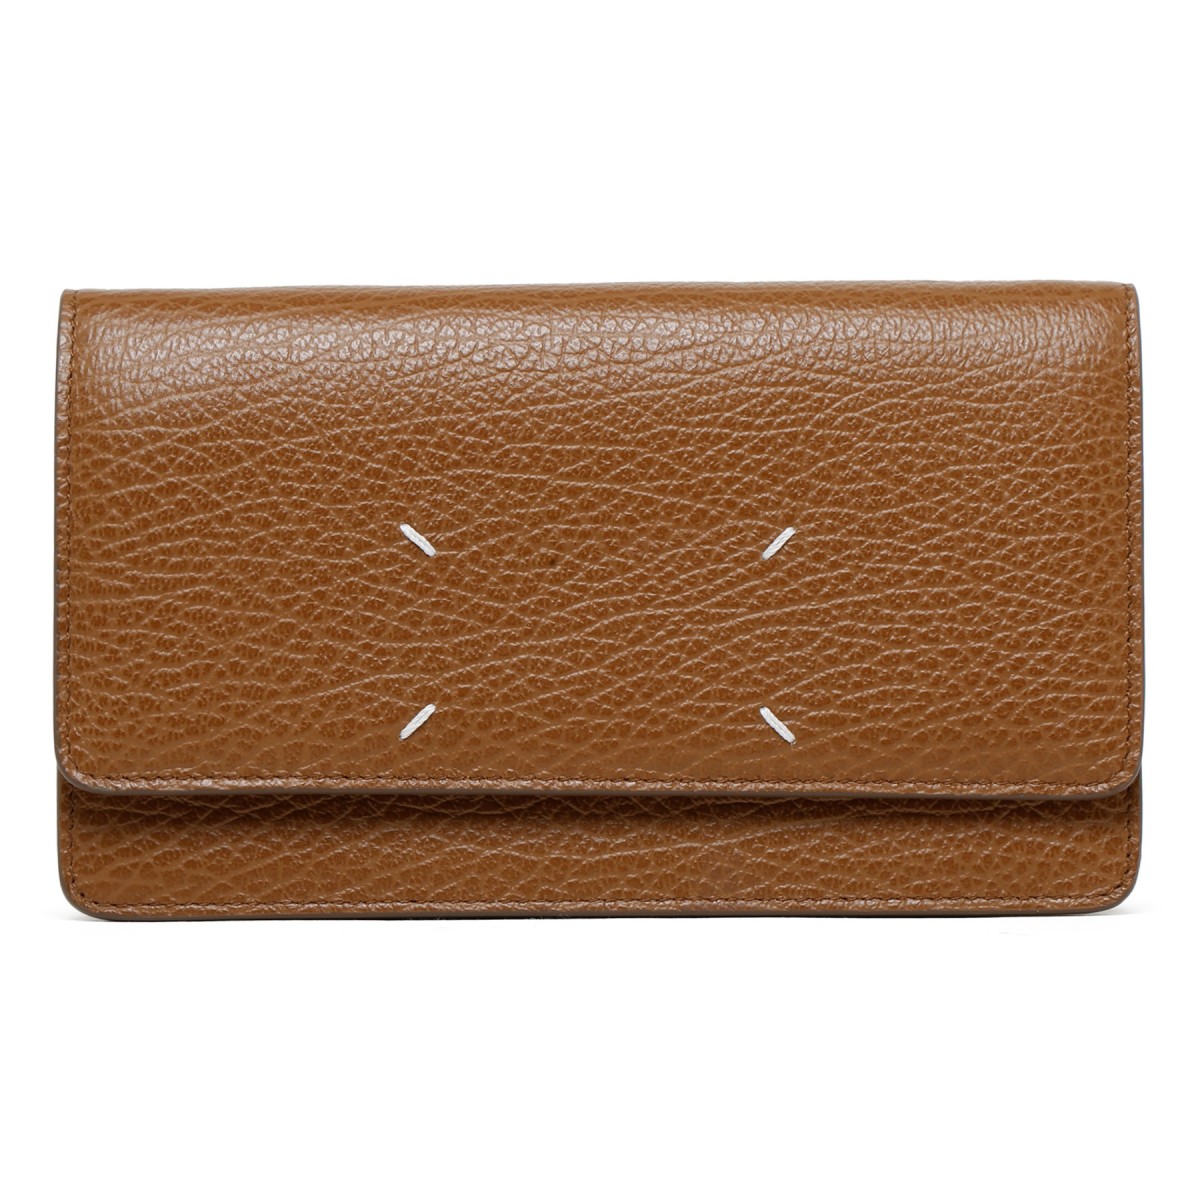 Brown Leather Chain wallet